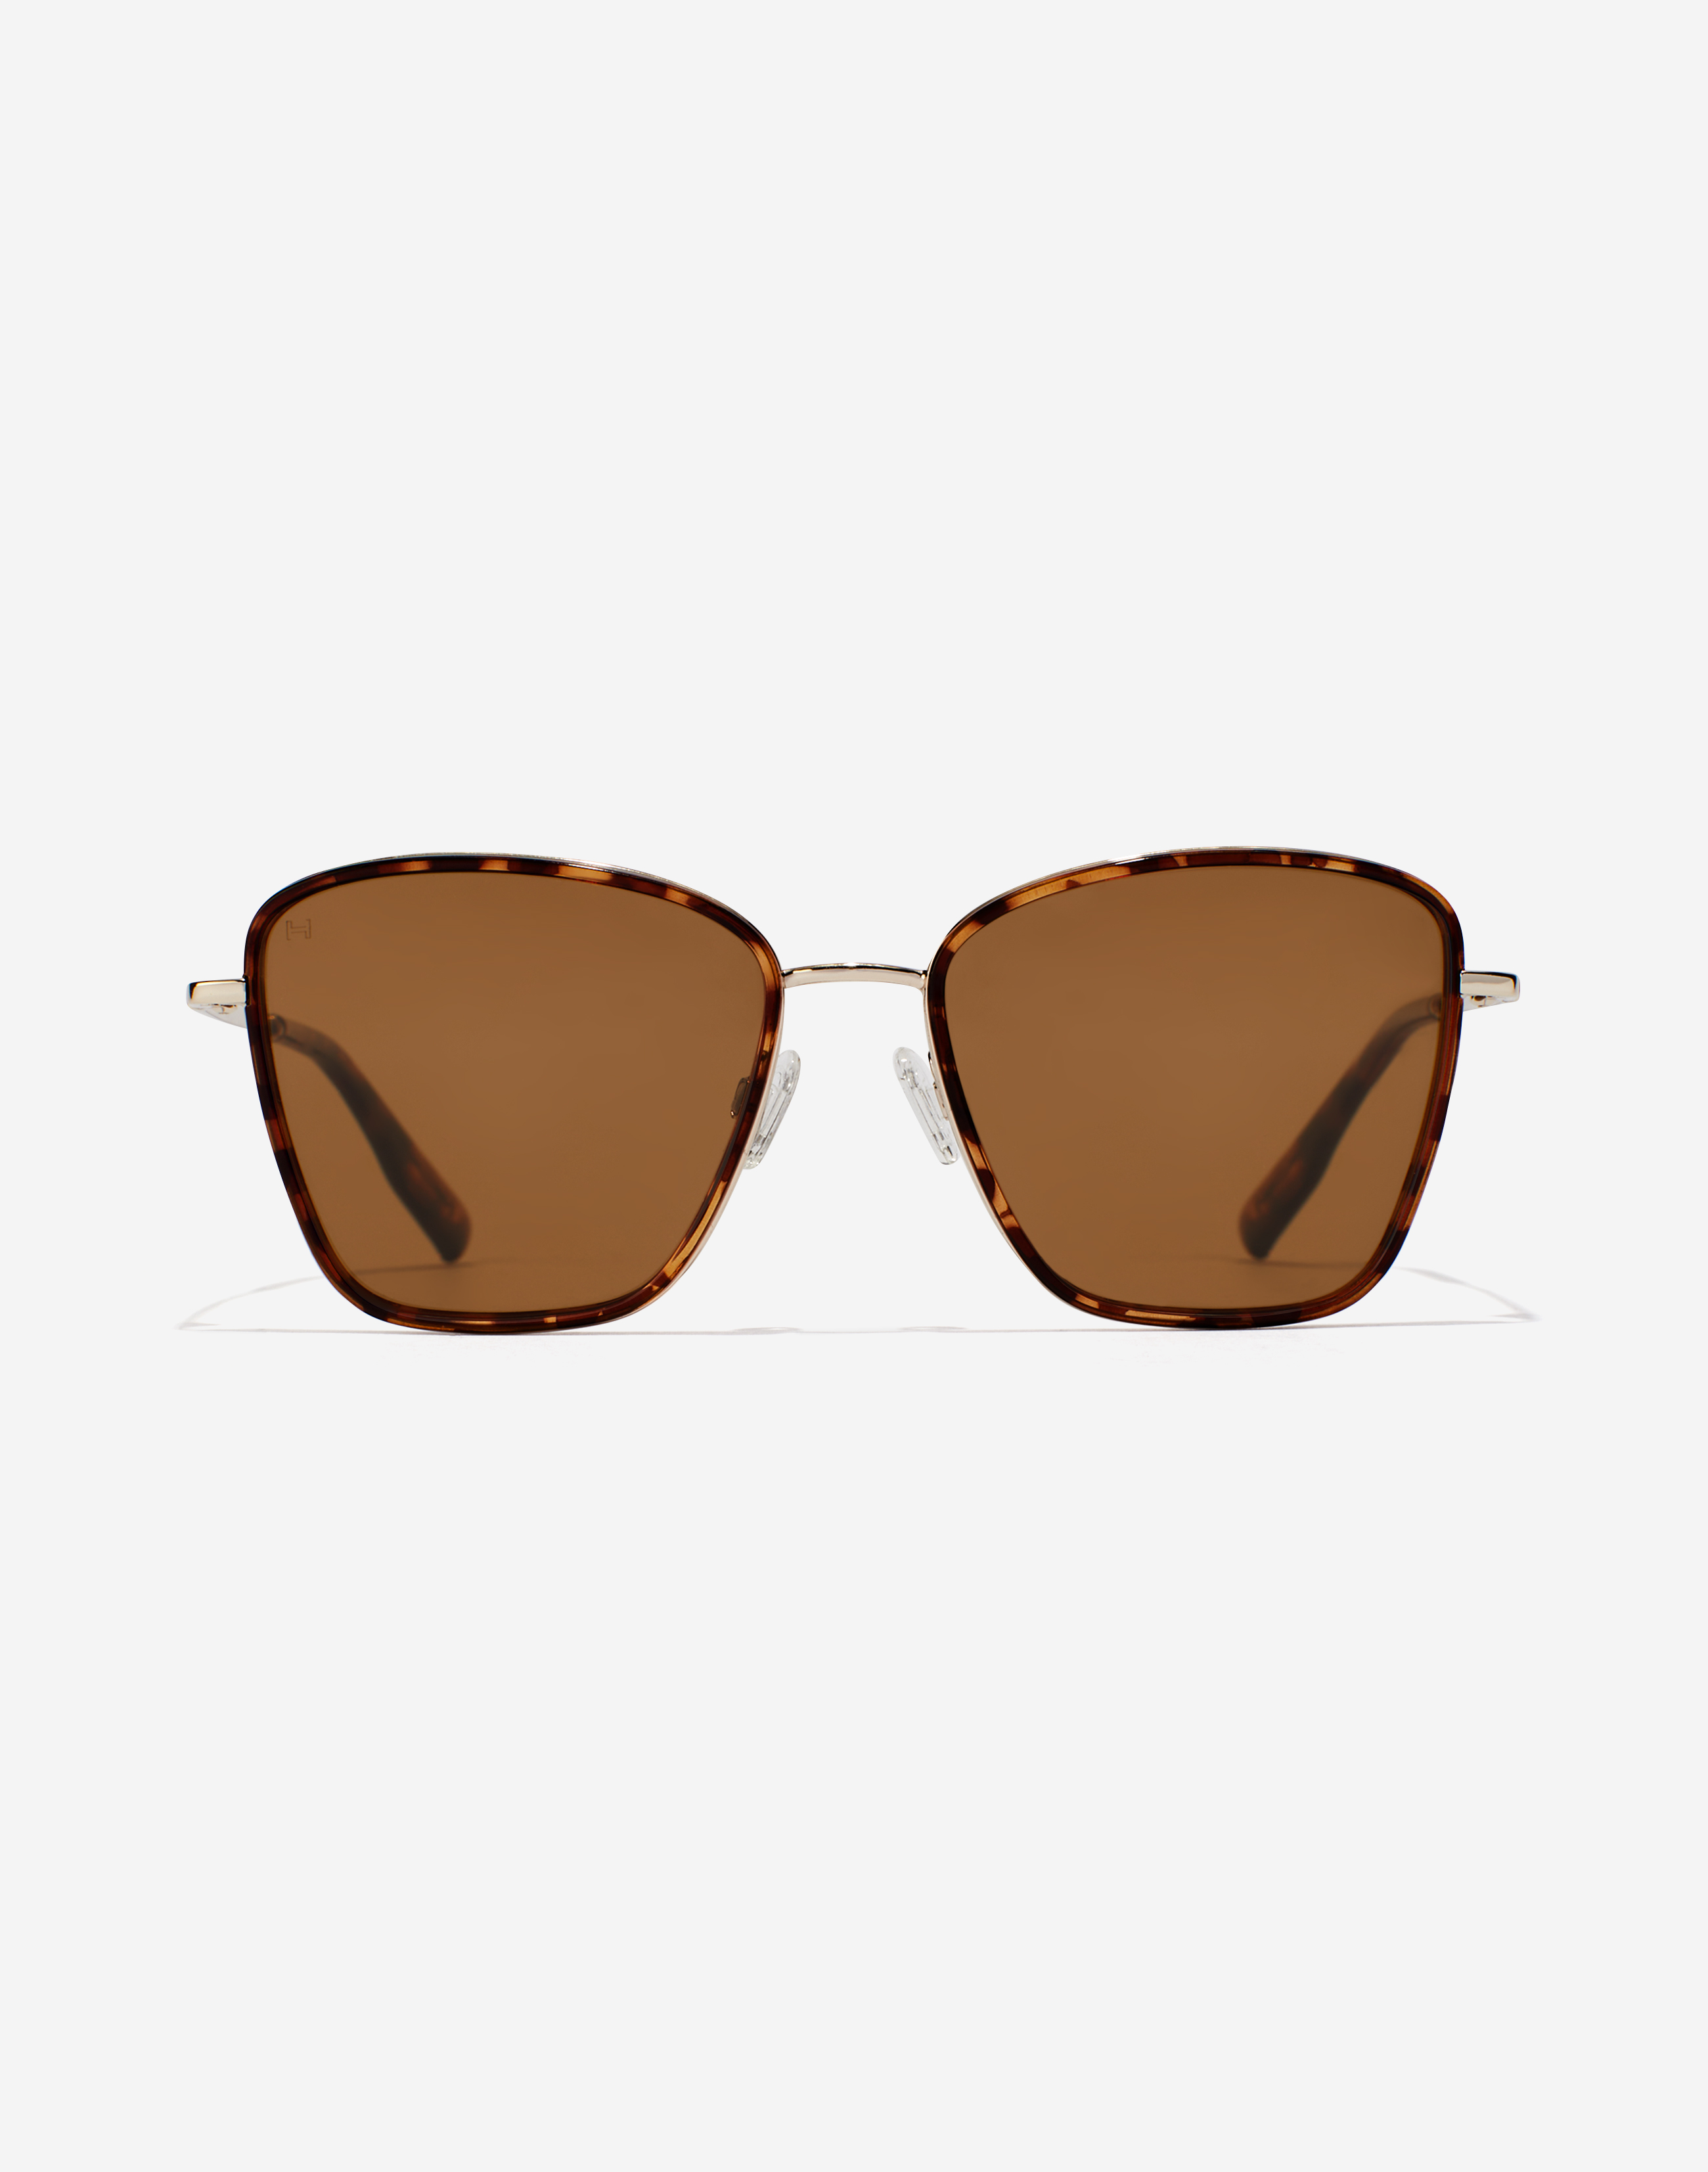 Hawkers CHILL - POLARIZED CAREY OLIVE master